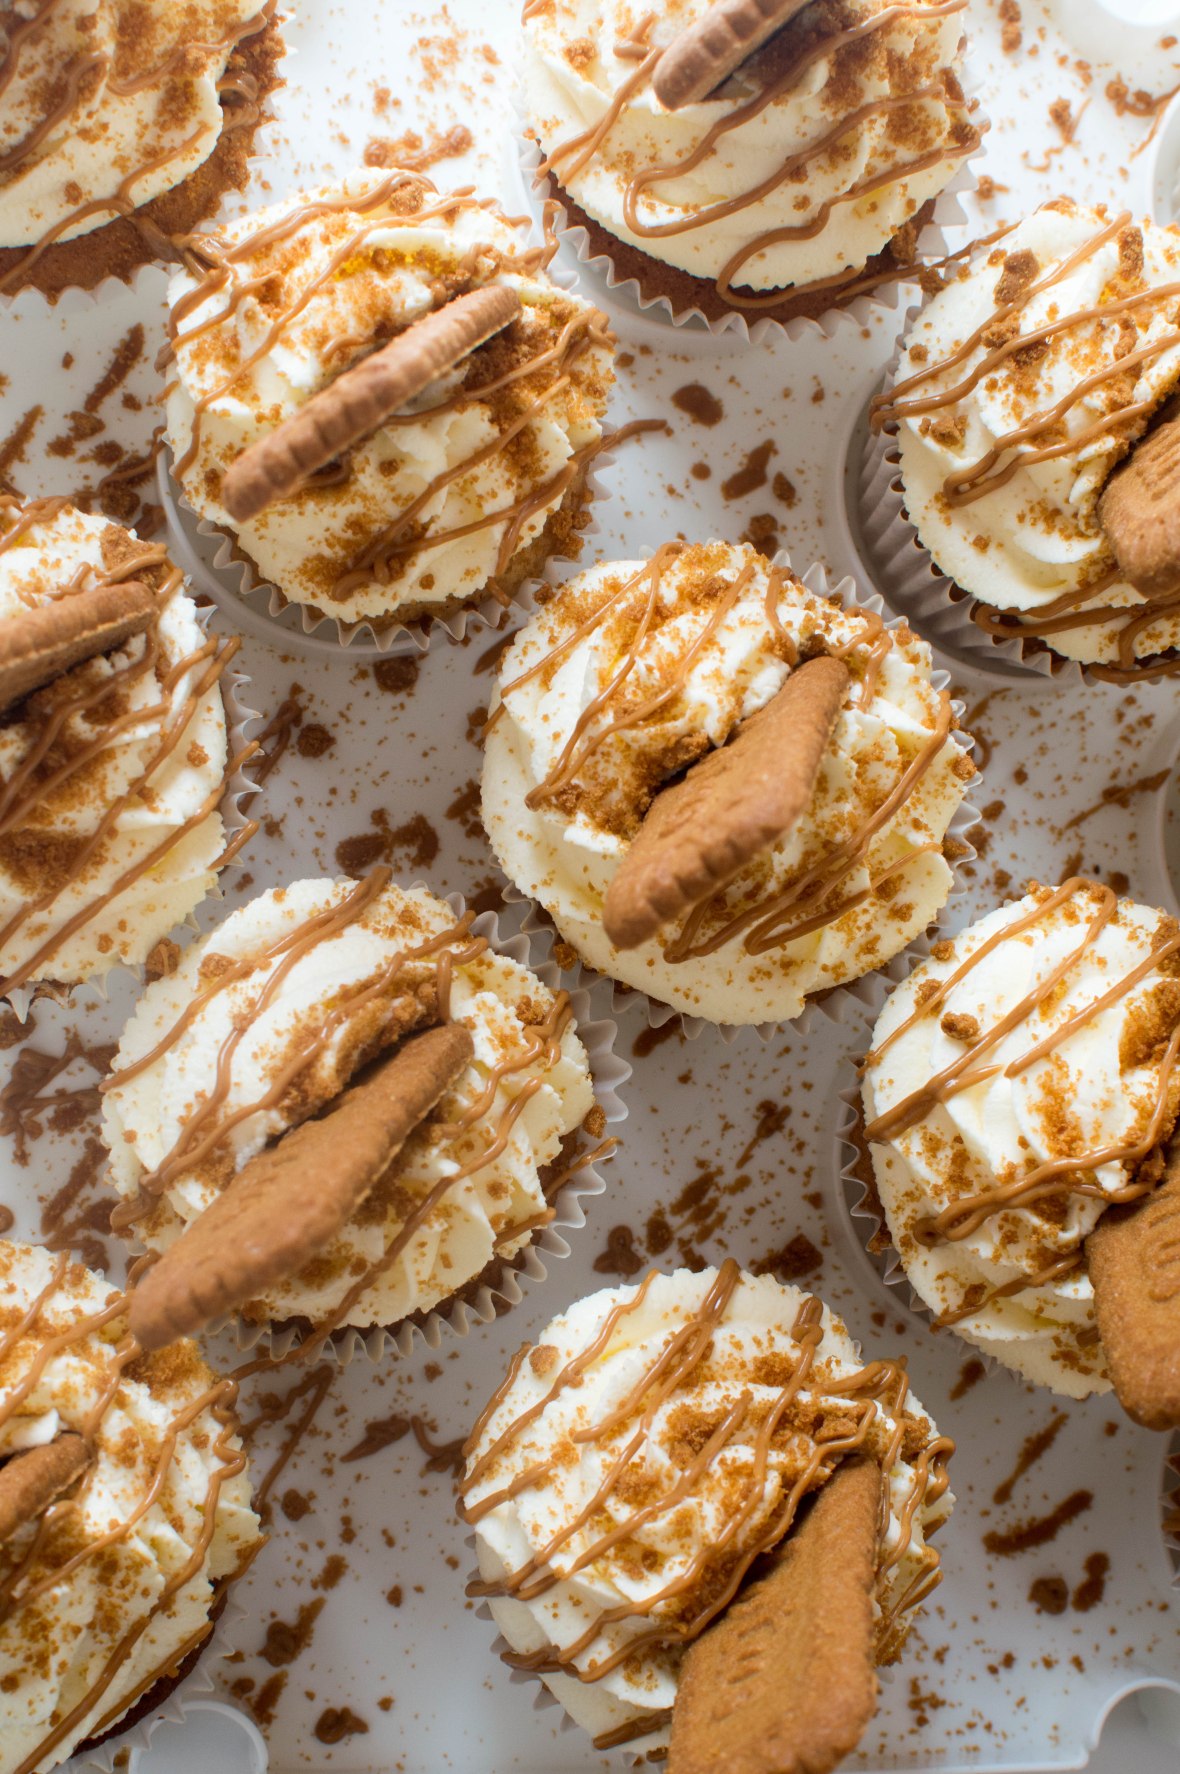 Lotus Biscoff Cupcakes With Whipped Cream Frosting And Speculoos Drizzle - Kay's Kitchen